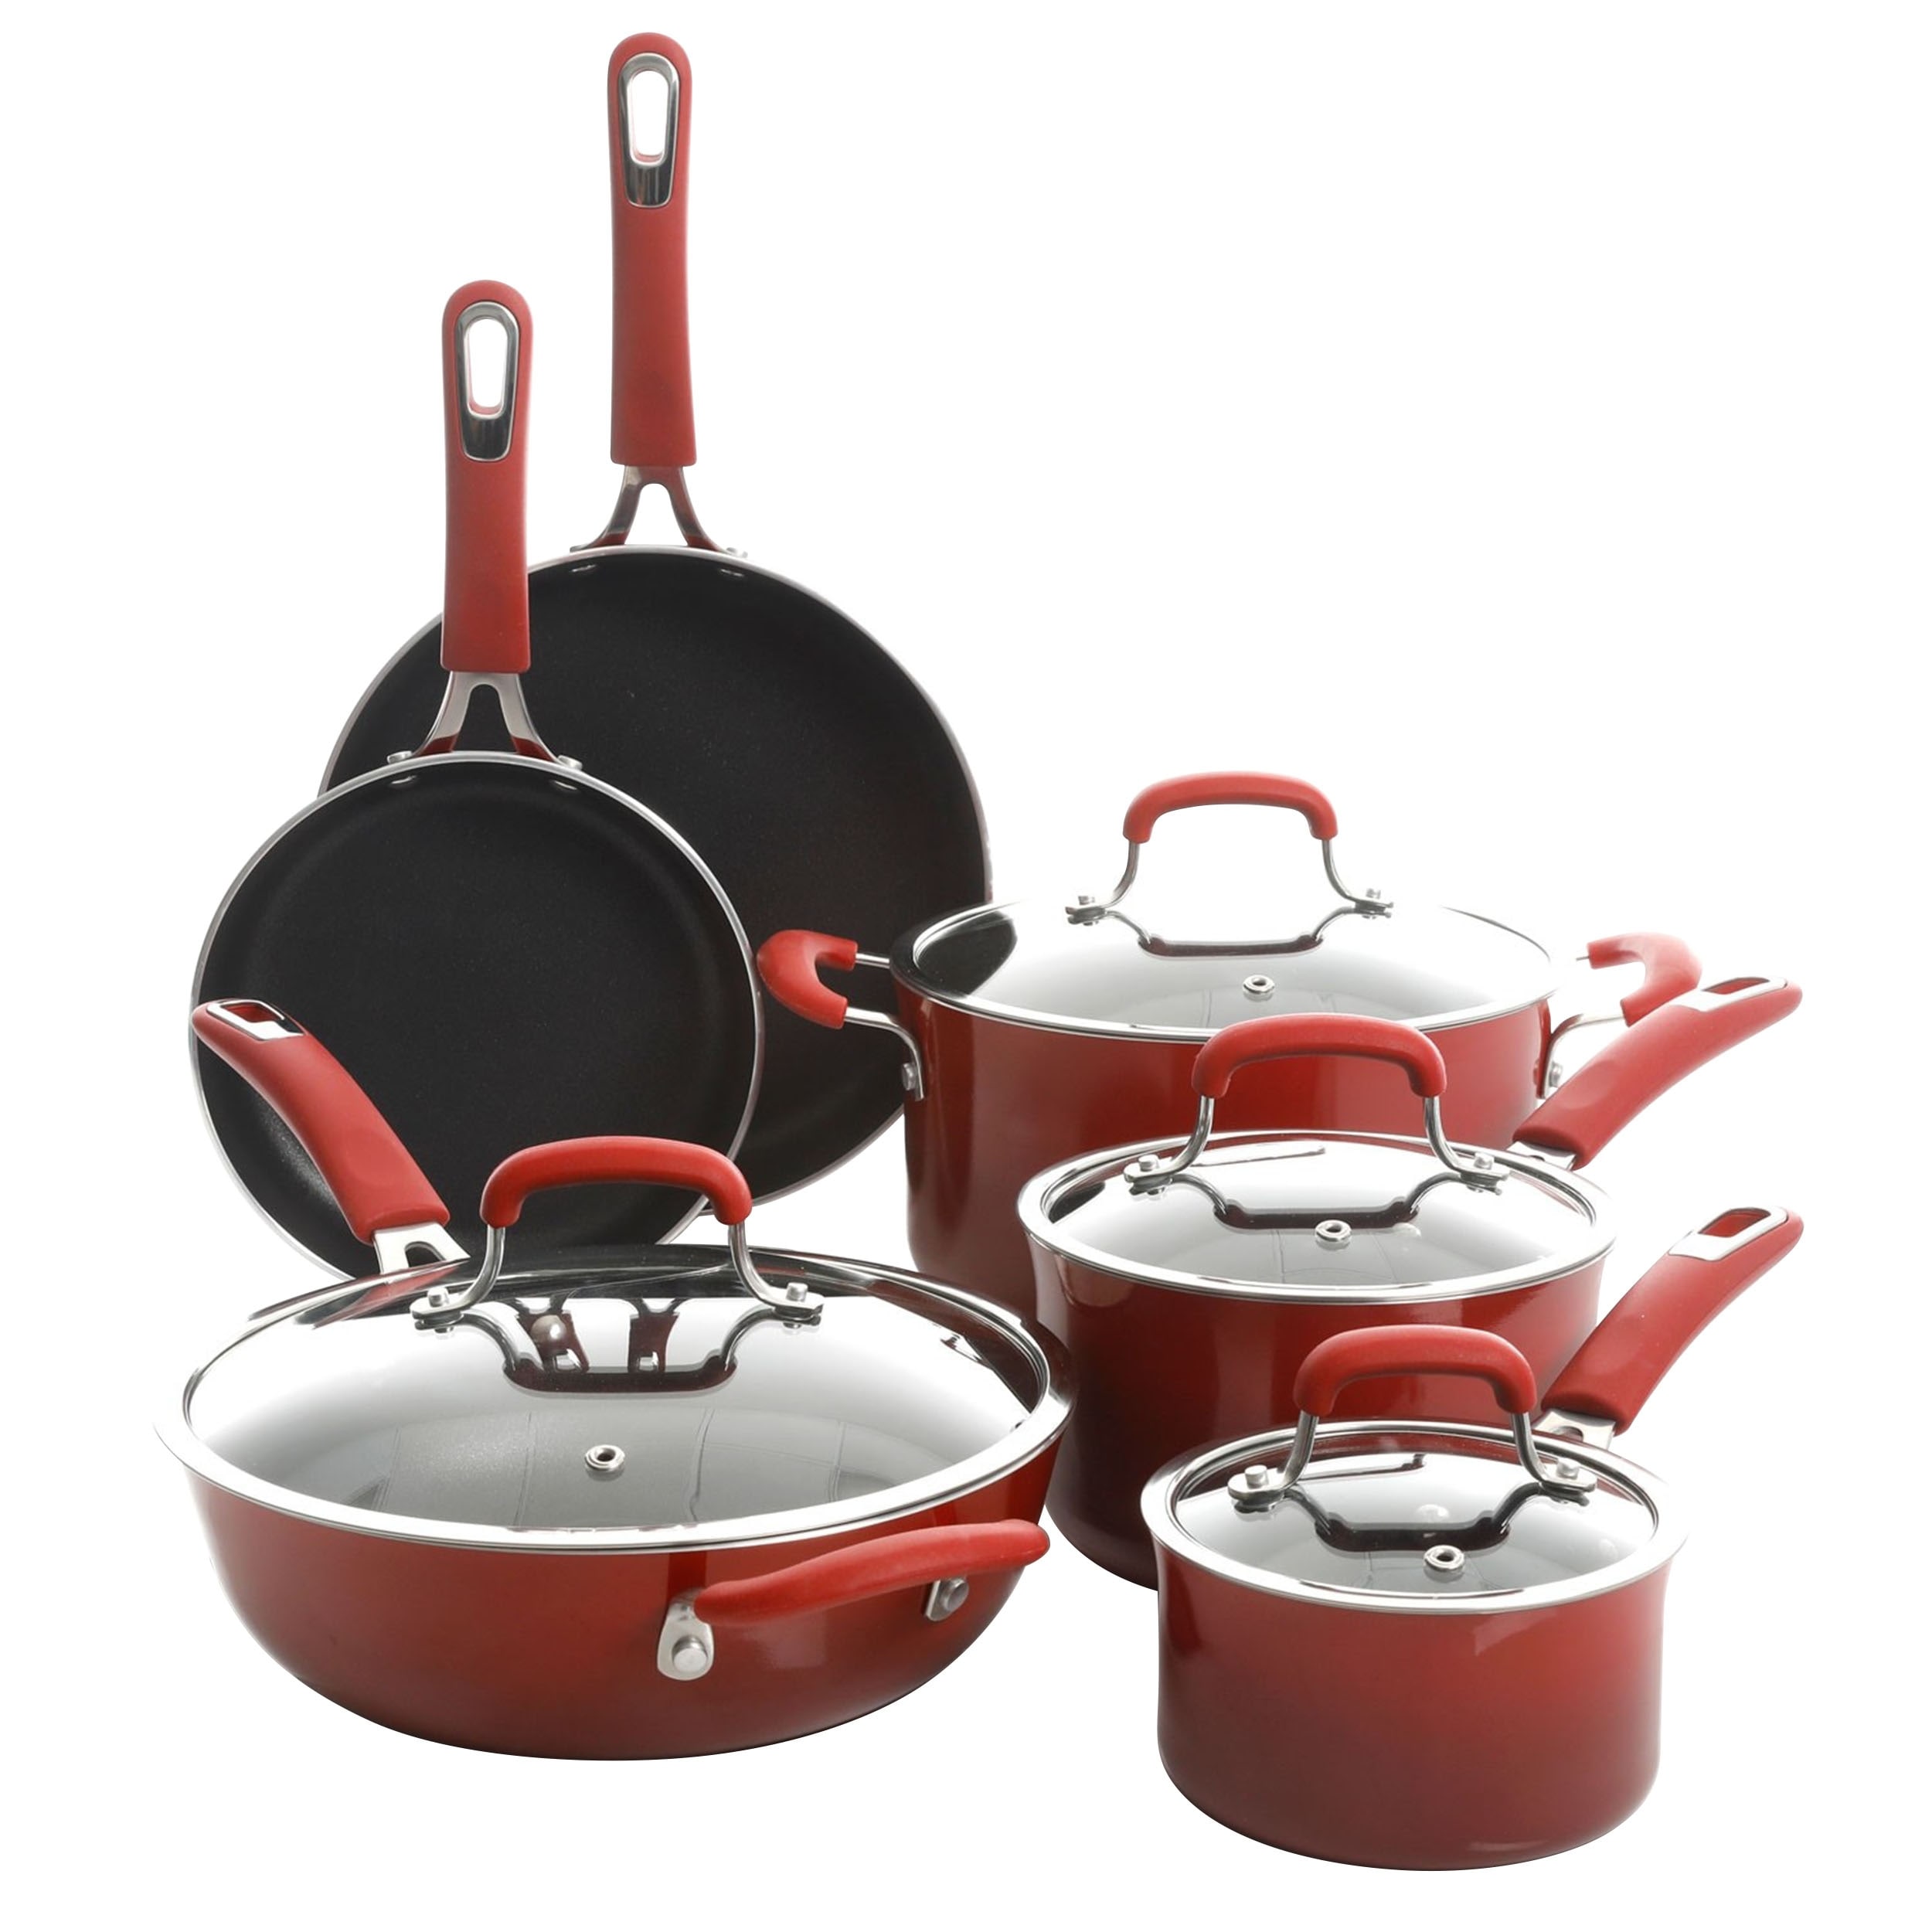 https://ak1.ostkcdn.com/images/products/is/images/direct/694561e33e762bf16d24aca22bbf9e117d551f19/Kenmore-Elite-Andover-10-Piece-Nonstick-Aluminum-Cookware-Set-in-Red-Gradient.jpg